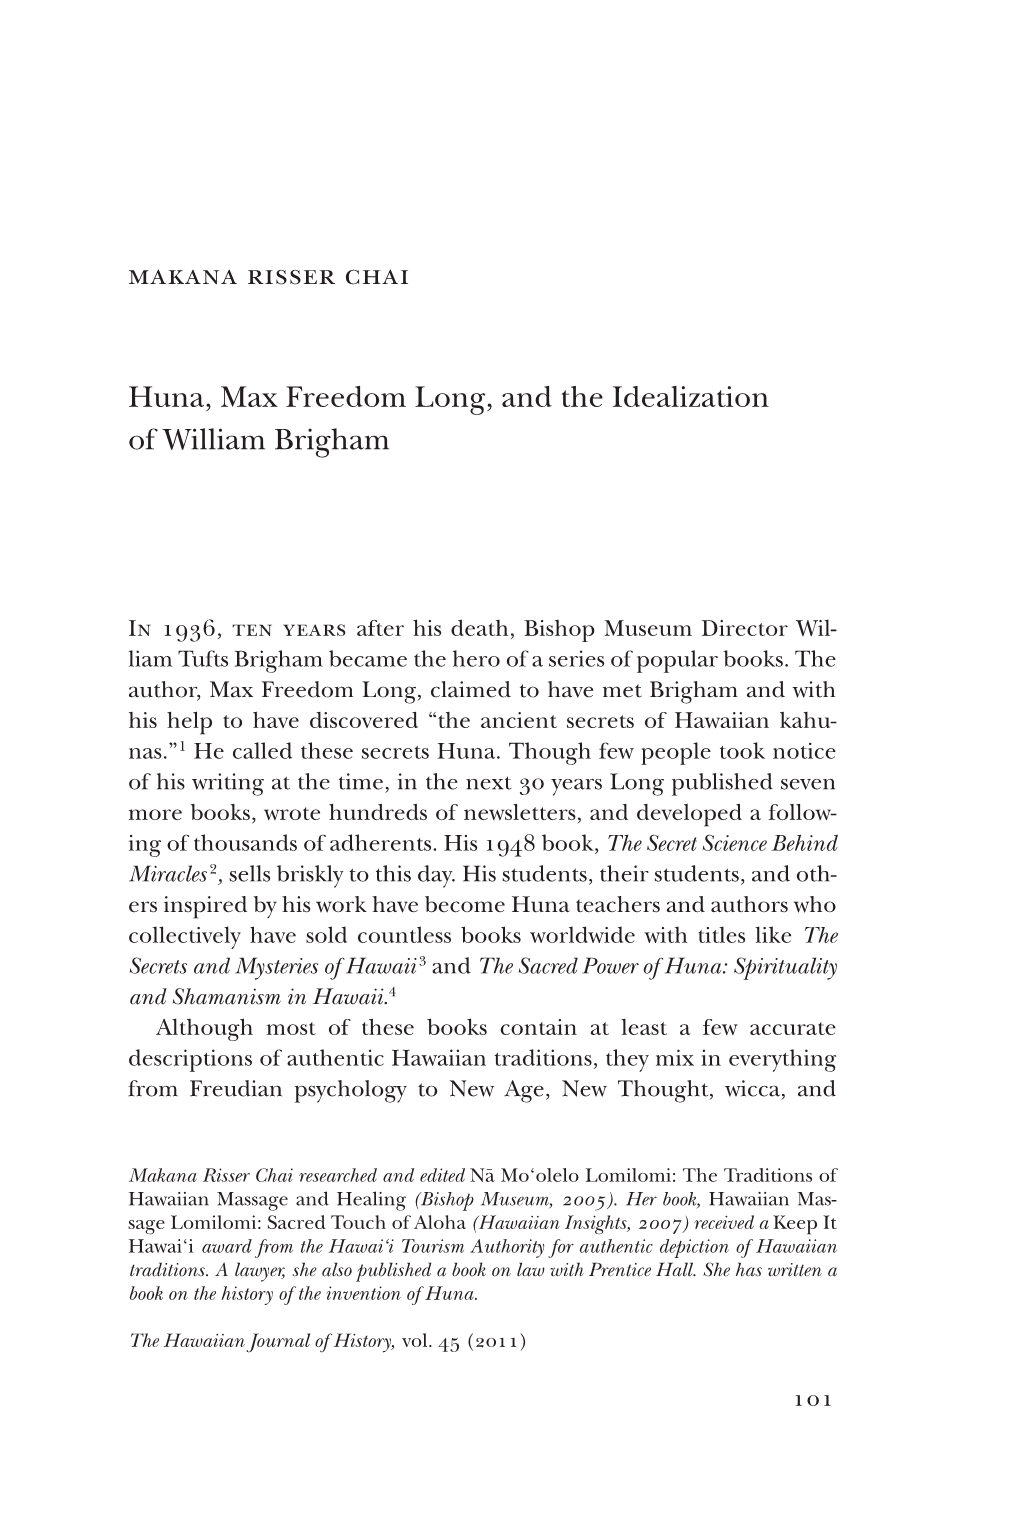 Huna, Max Freedom Long, and the Idealization of William Brigham